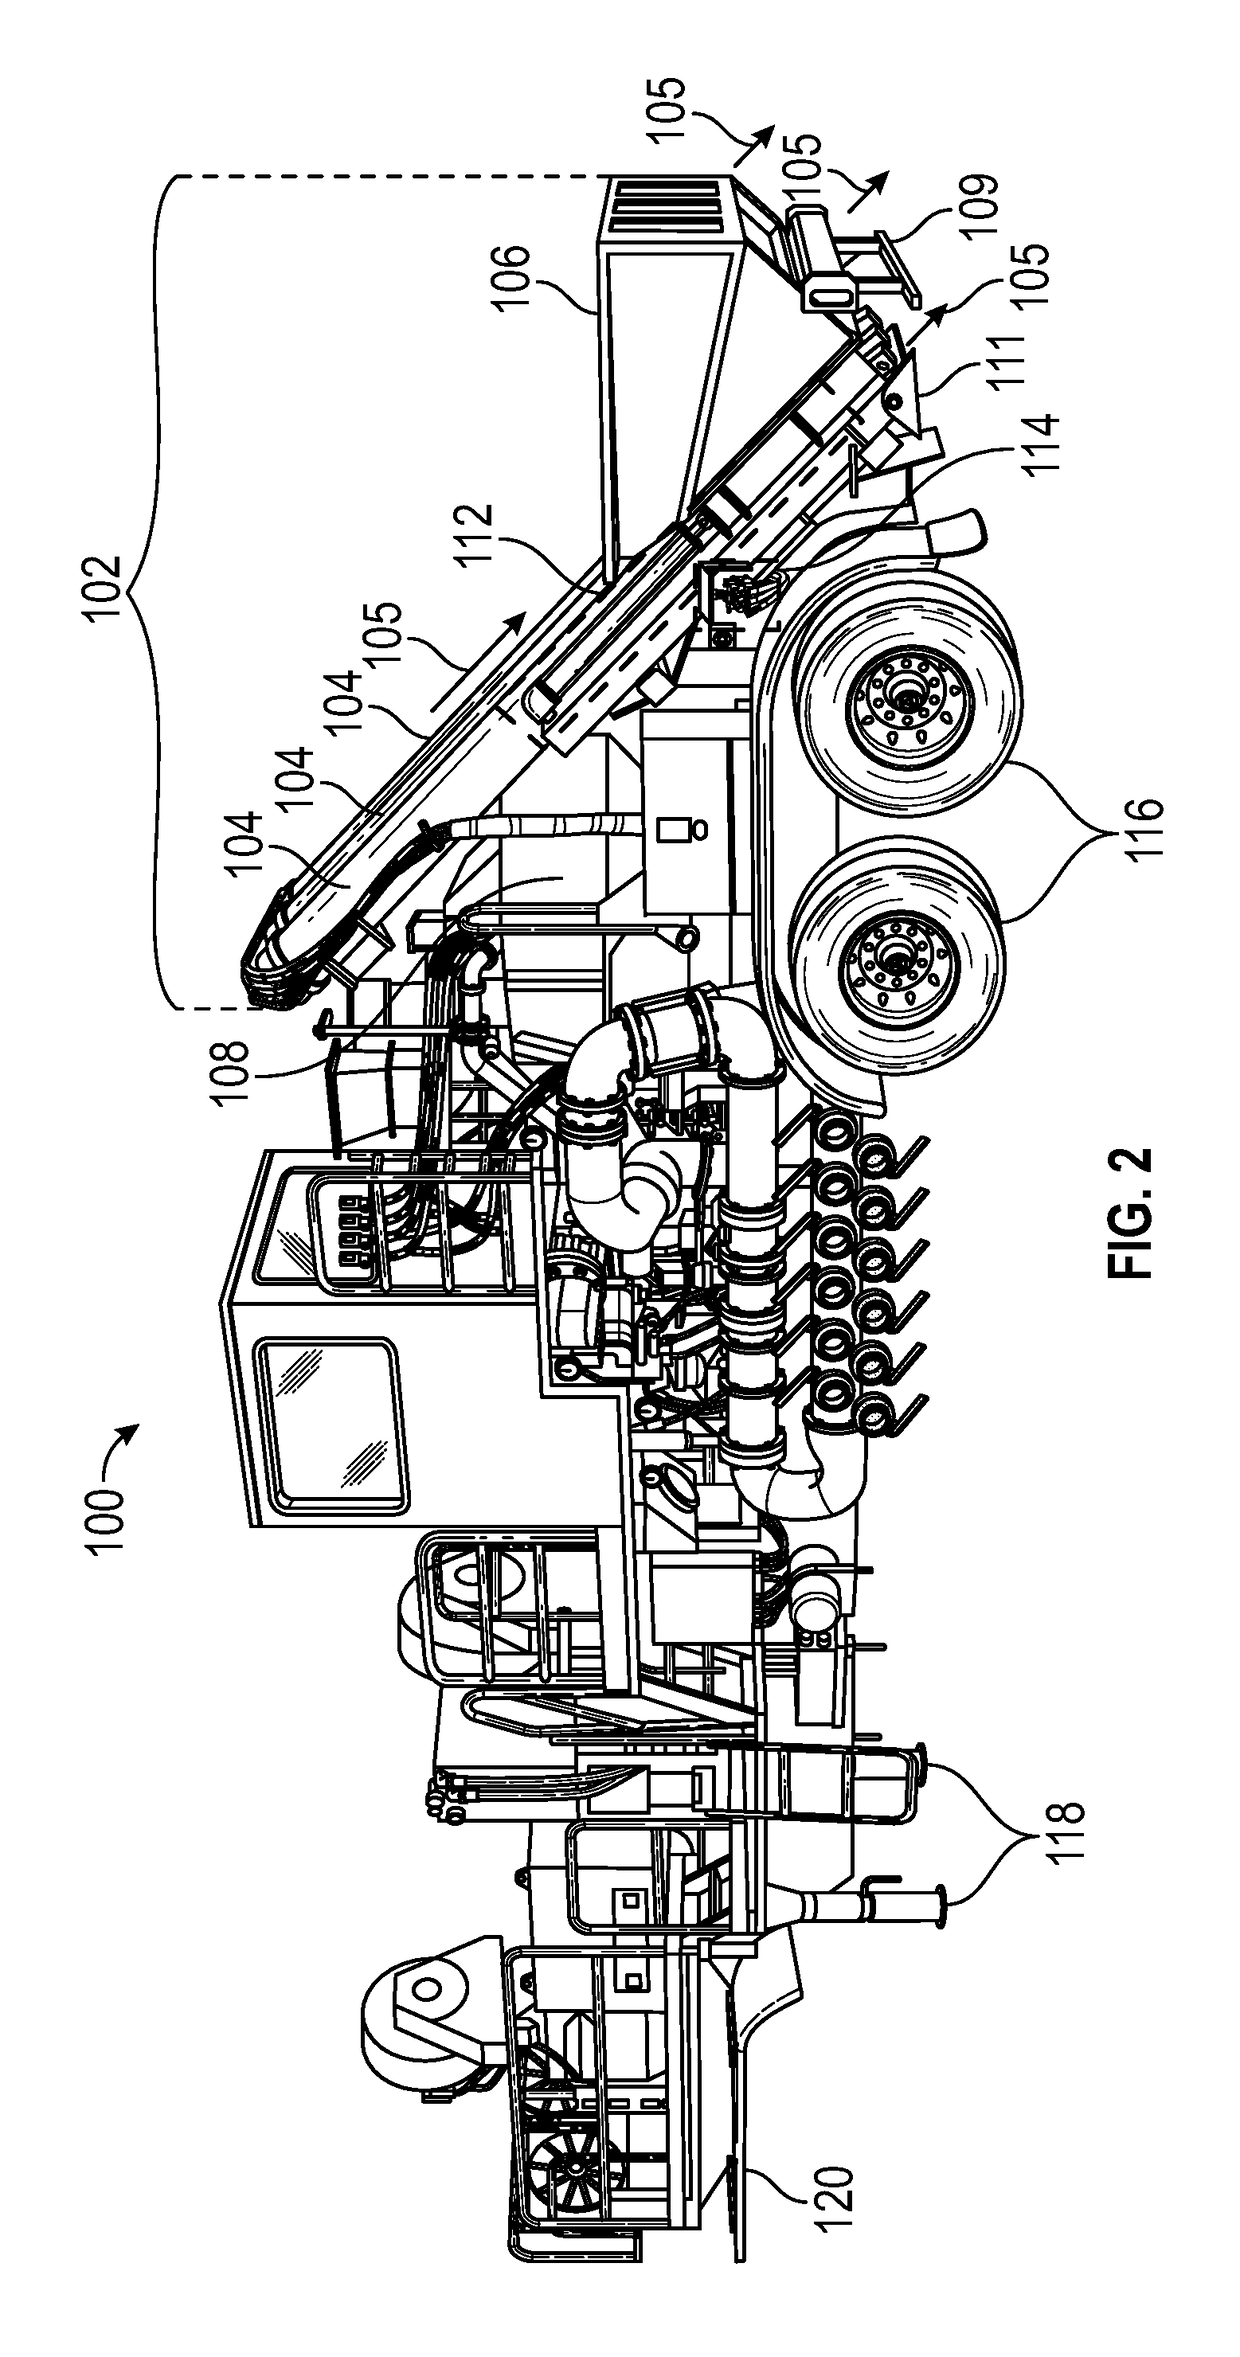 Independent control of auger and hopper assembly in electric blender system